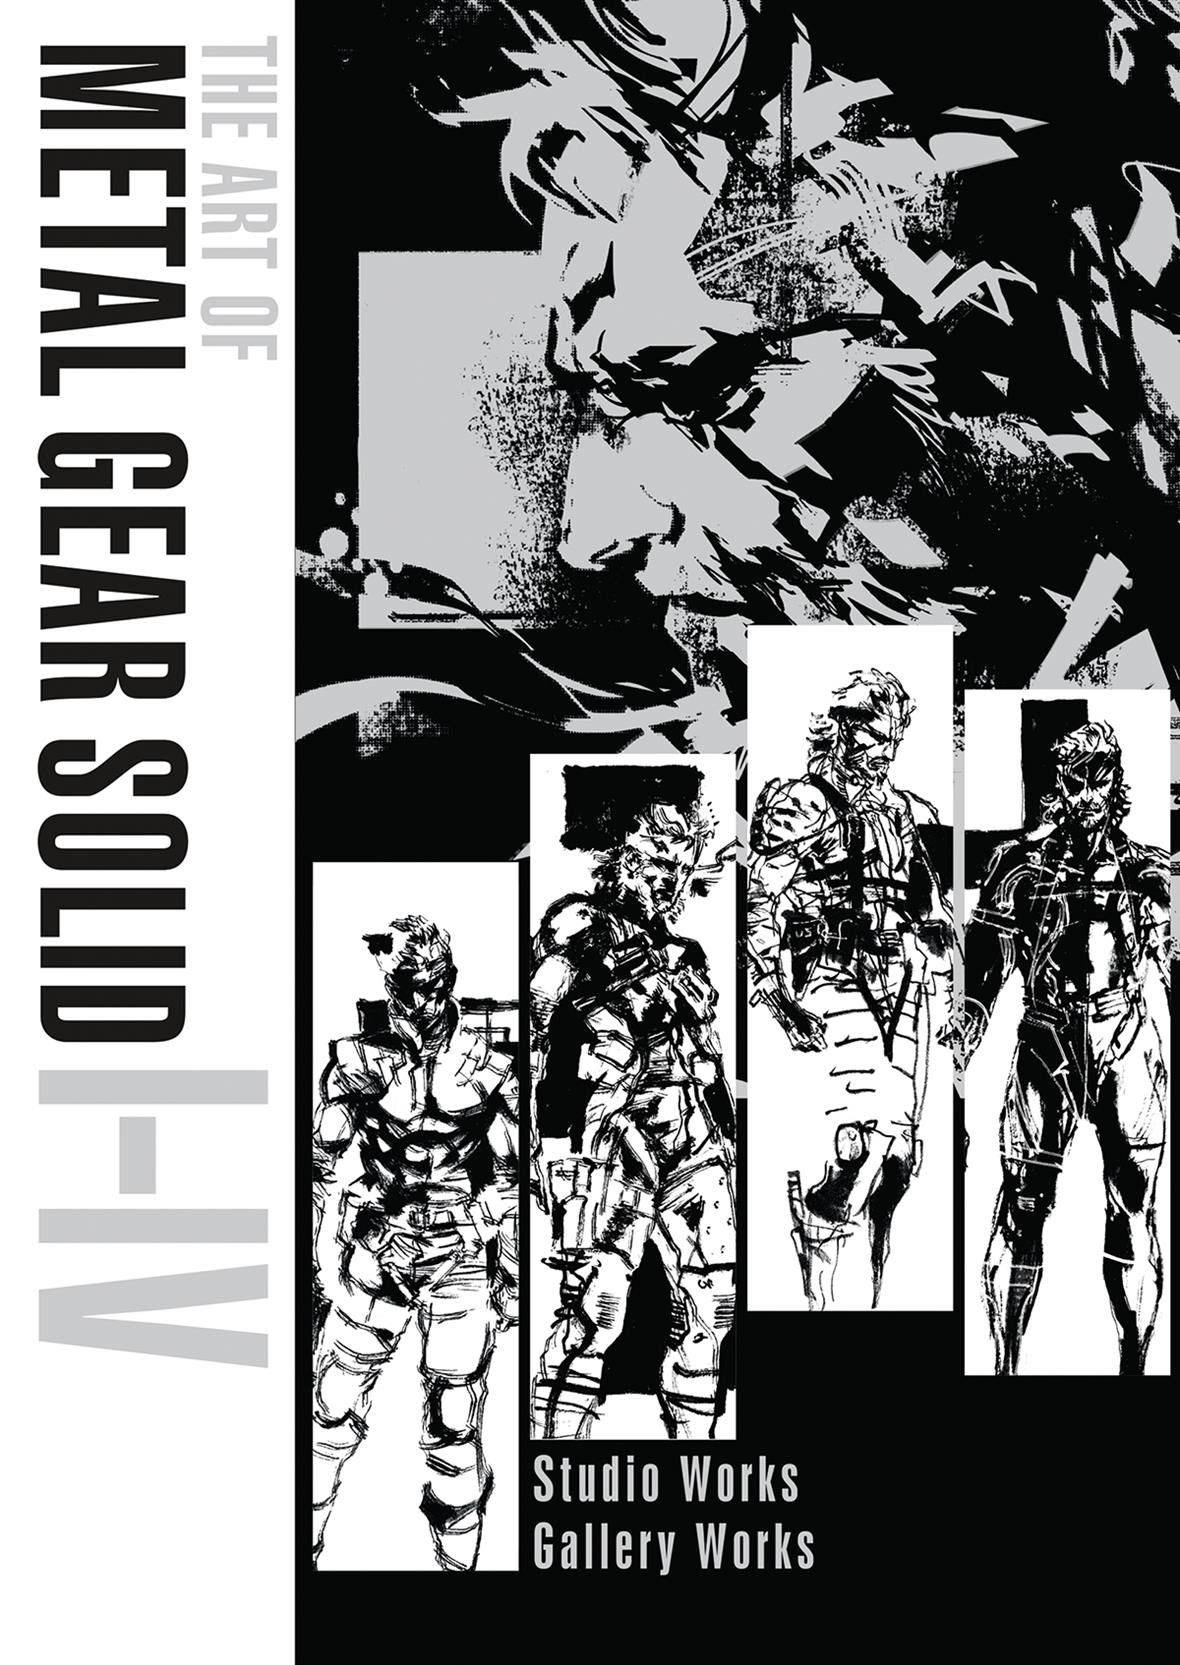 Dark Horse to publish ultimate collection of Metal Gear Solid